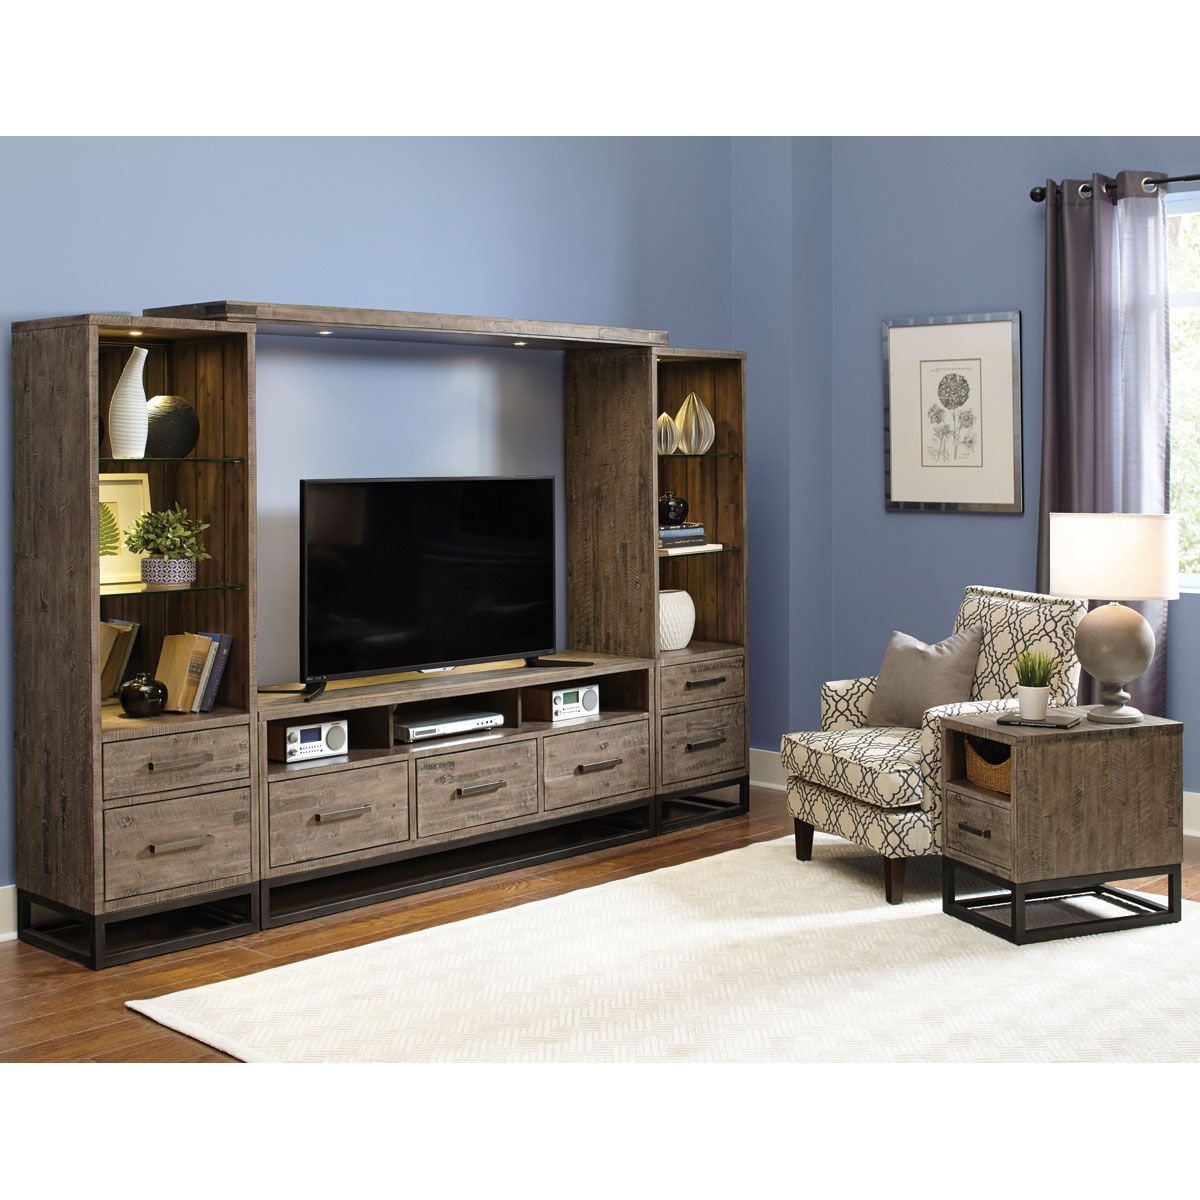 Willow Oak 4 Piece Entertainment Center | Badcock Home Furniture &more Intended For Entertainment Units With Bridge (Gallery 20 of 20)